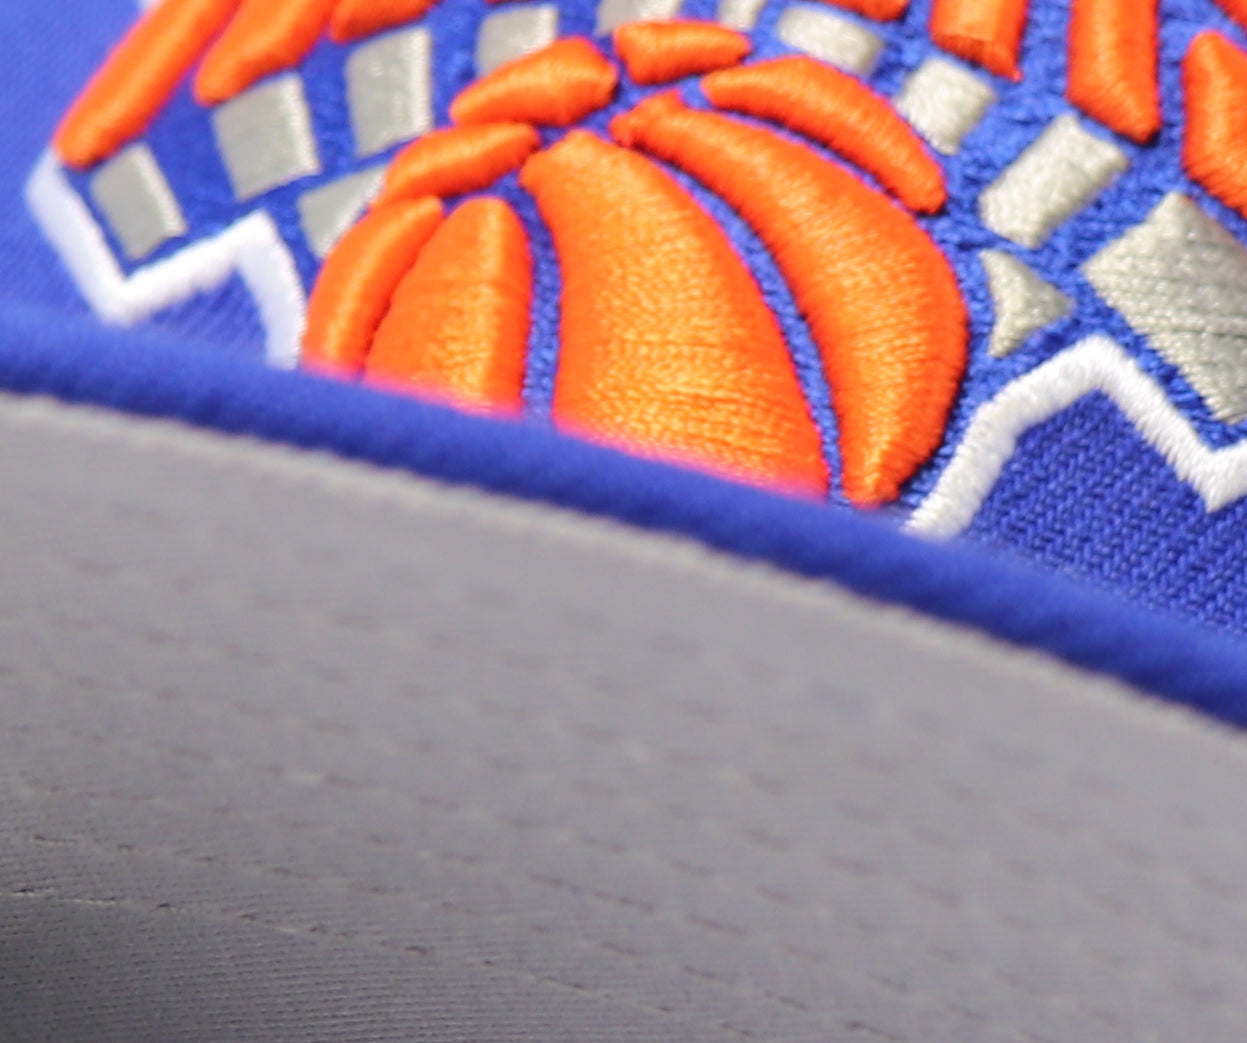 NEW YORK KNICKS (ROYAL) NEW ERA 59FIFTY FITTED